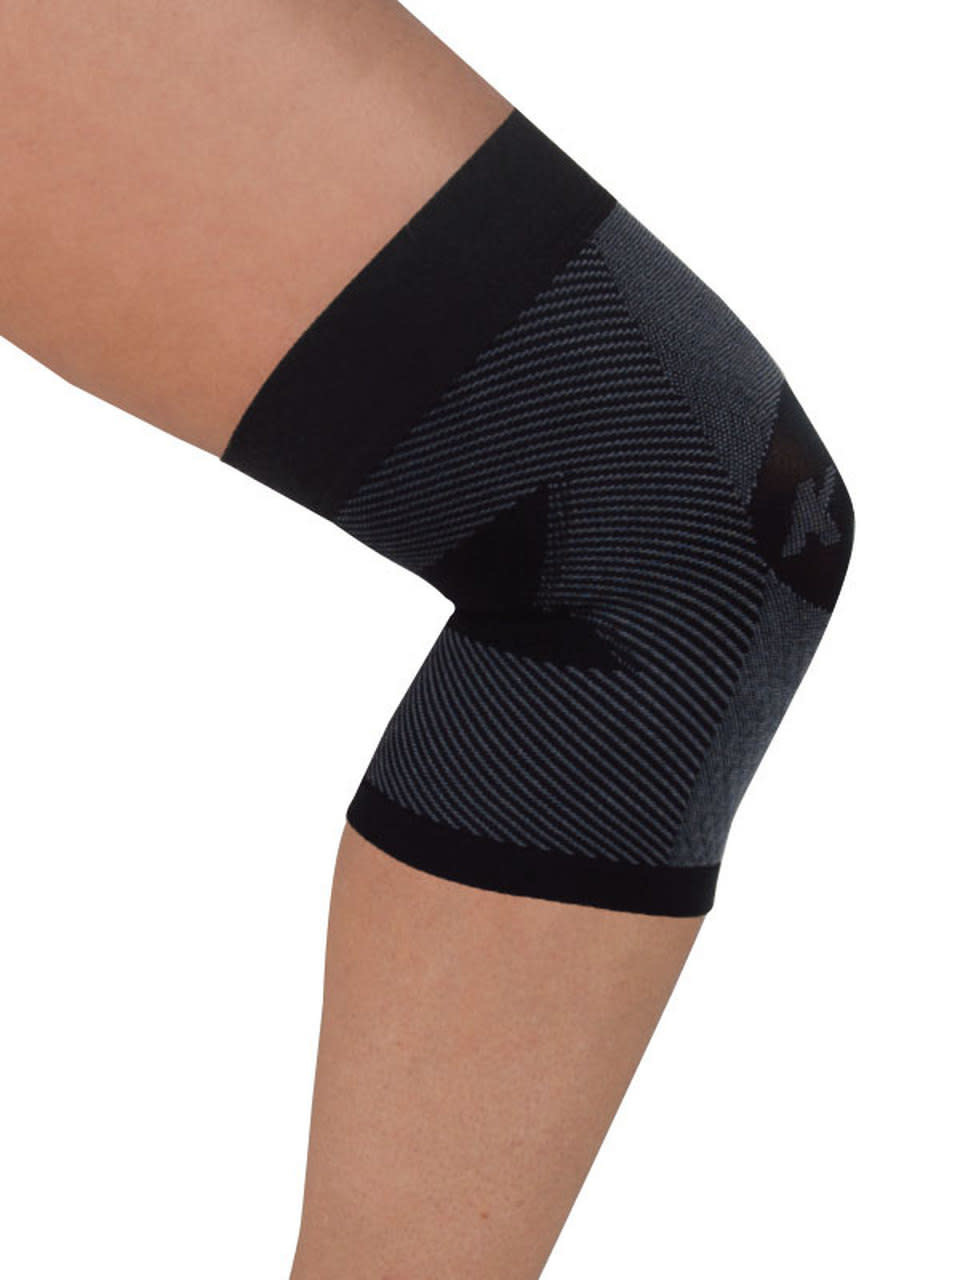 The Comprehensive Guide to Wearing and Caring for Your OrthoSleeve